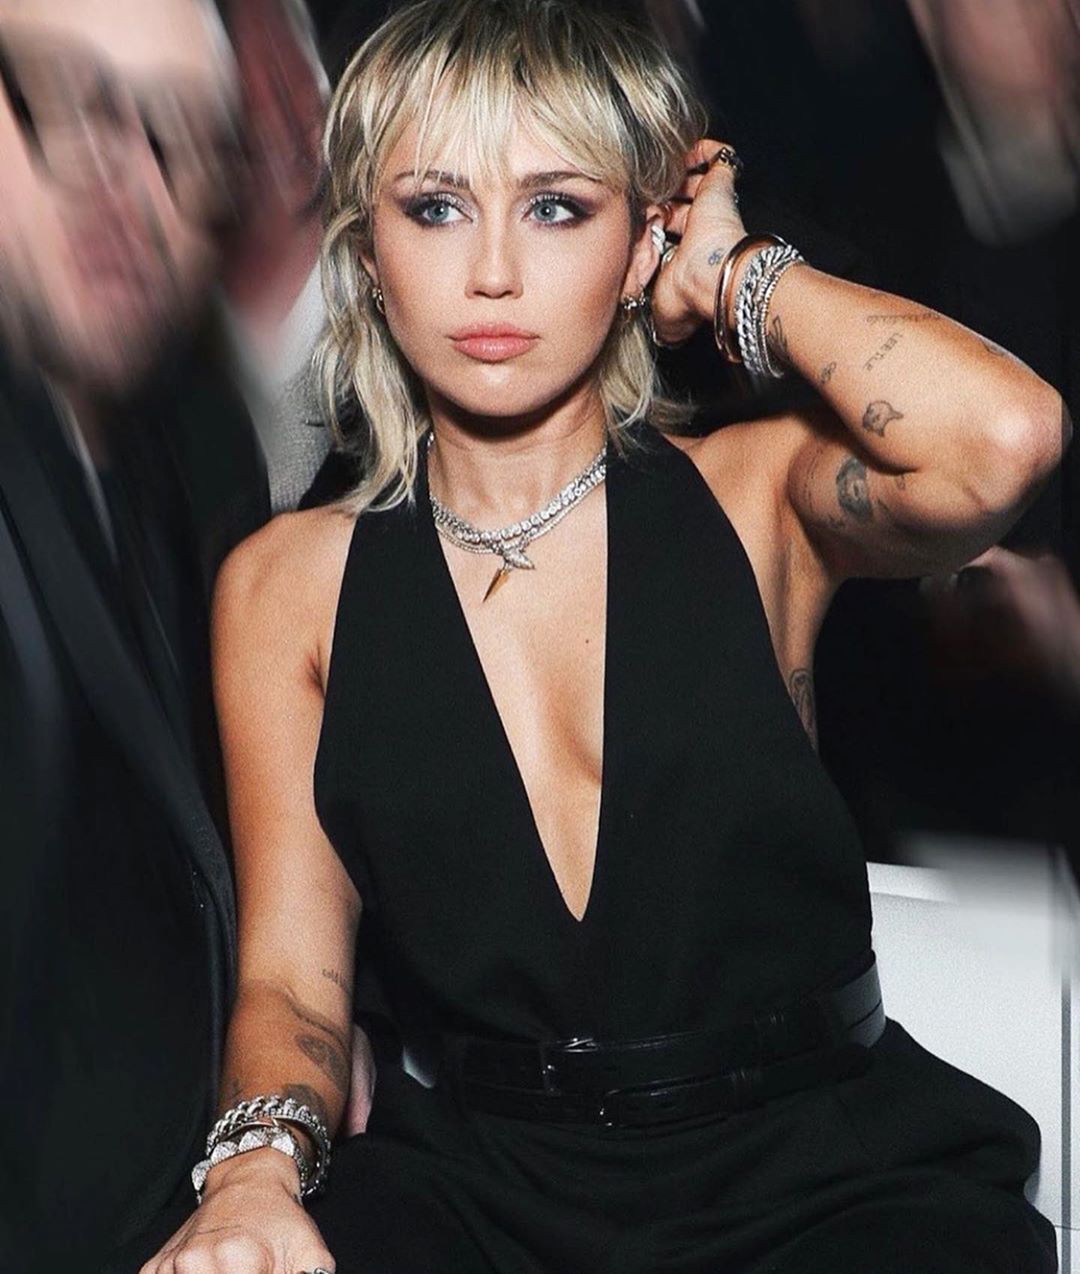 mileycyrus muscle pic, blond hairs, Haircuts